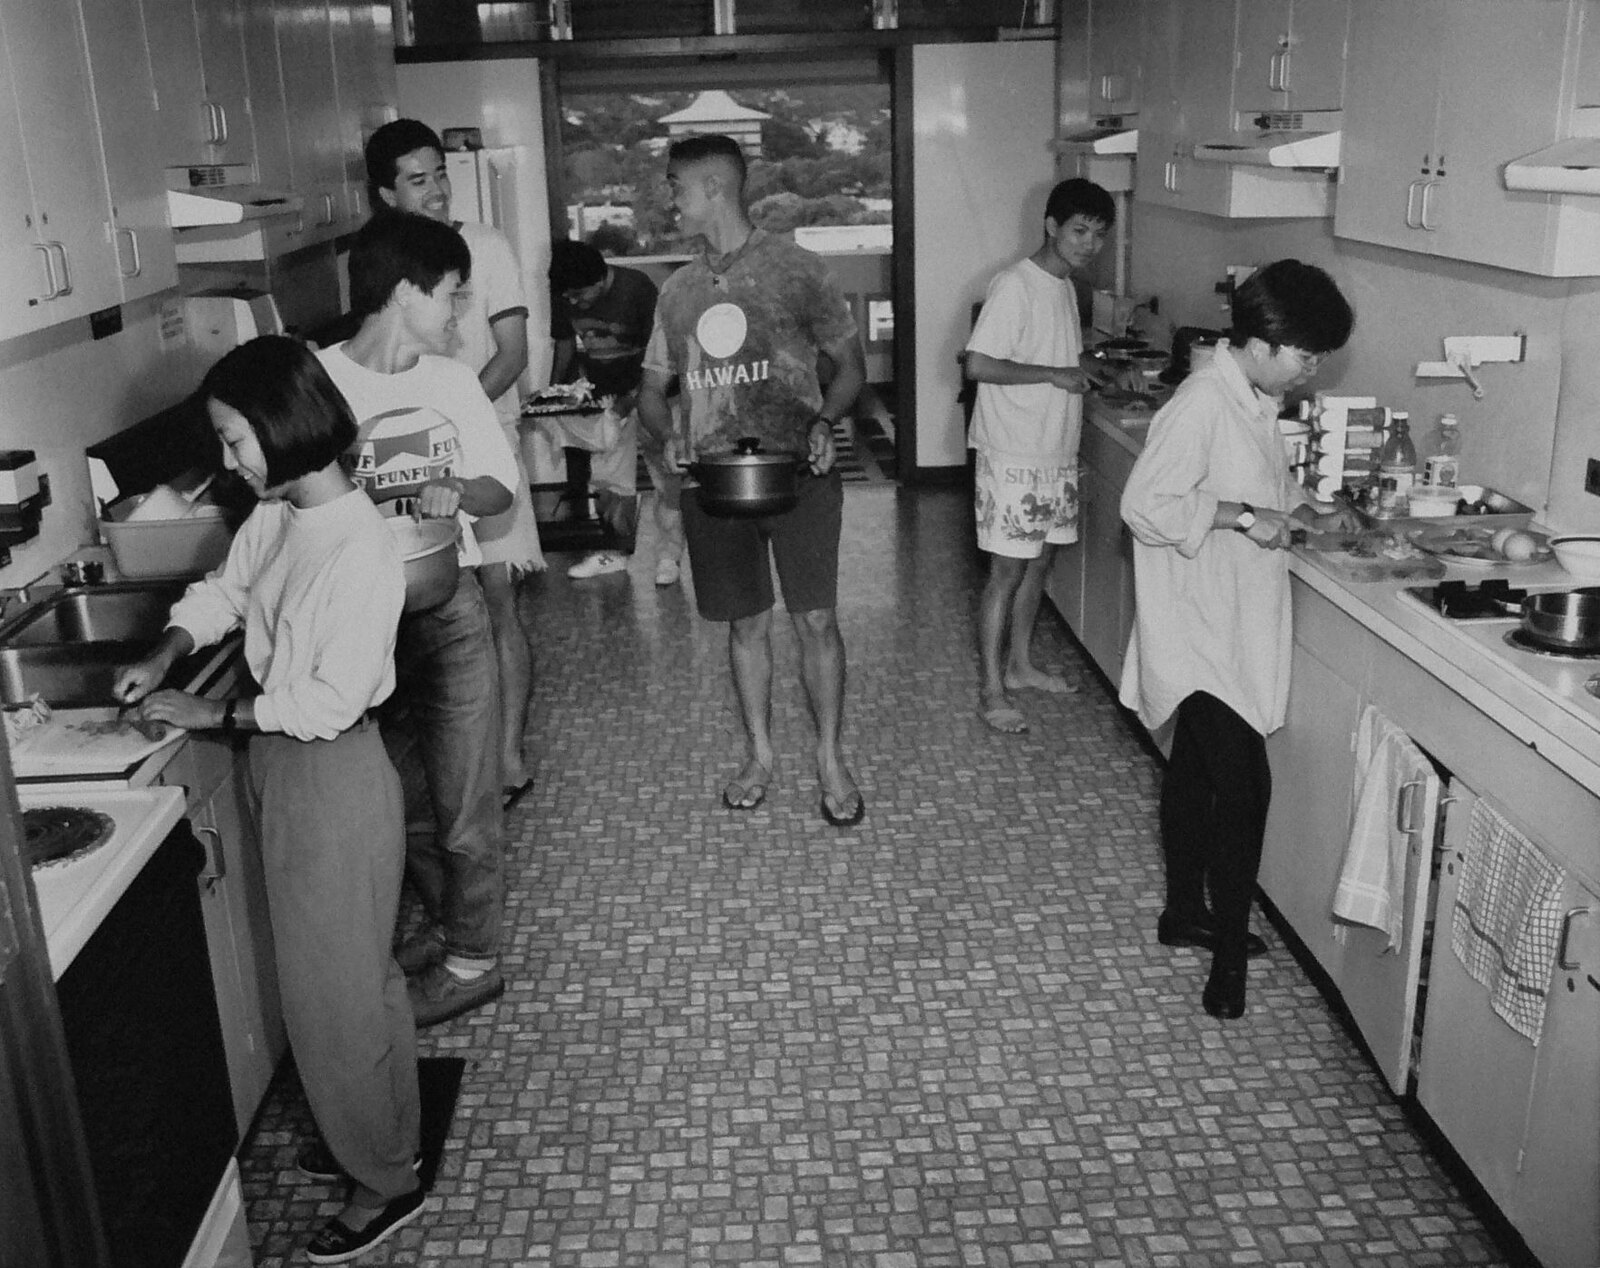 Students cooking food in Hale Manoa dorms, black and white photo